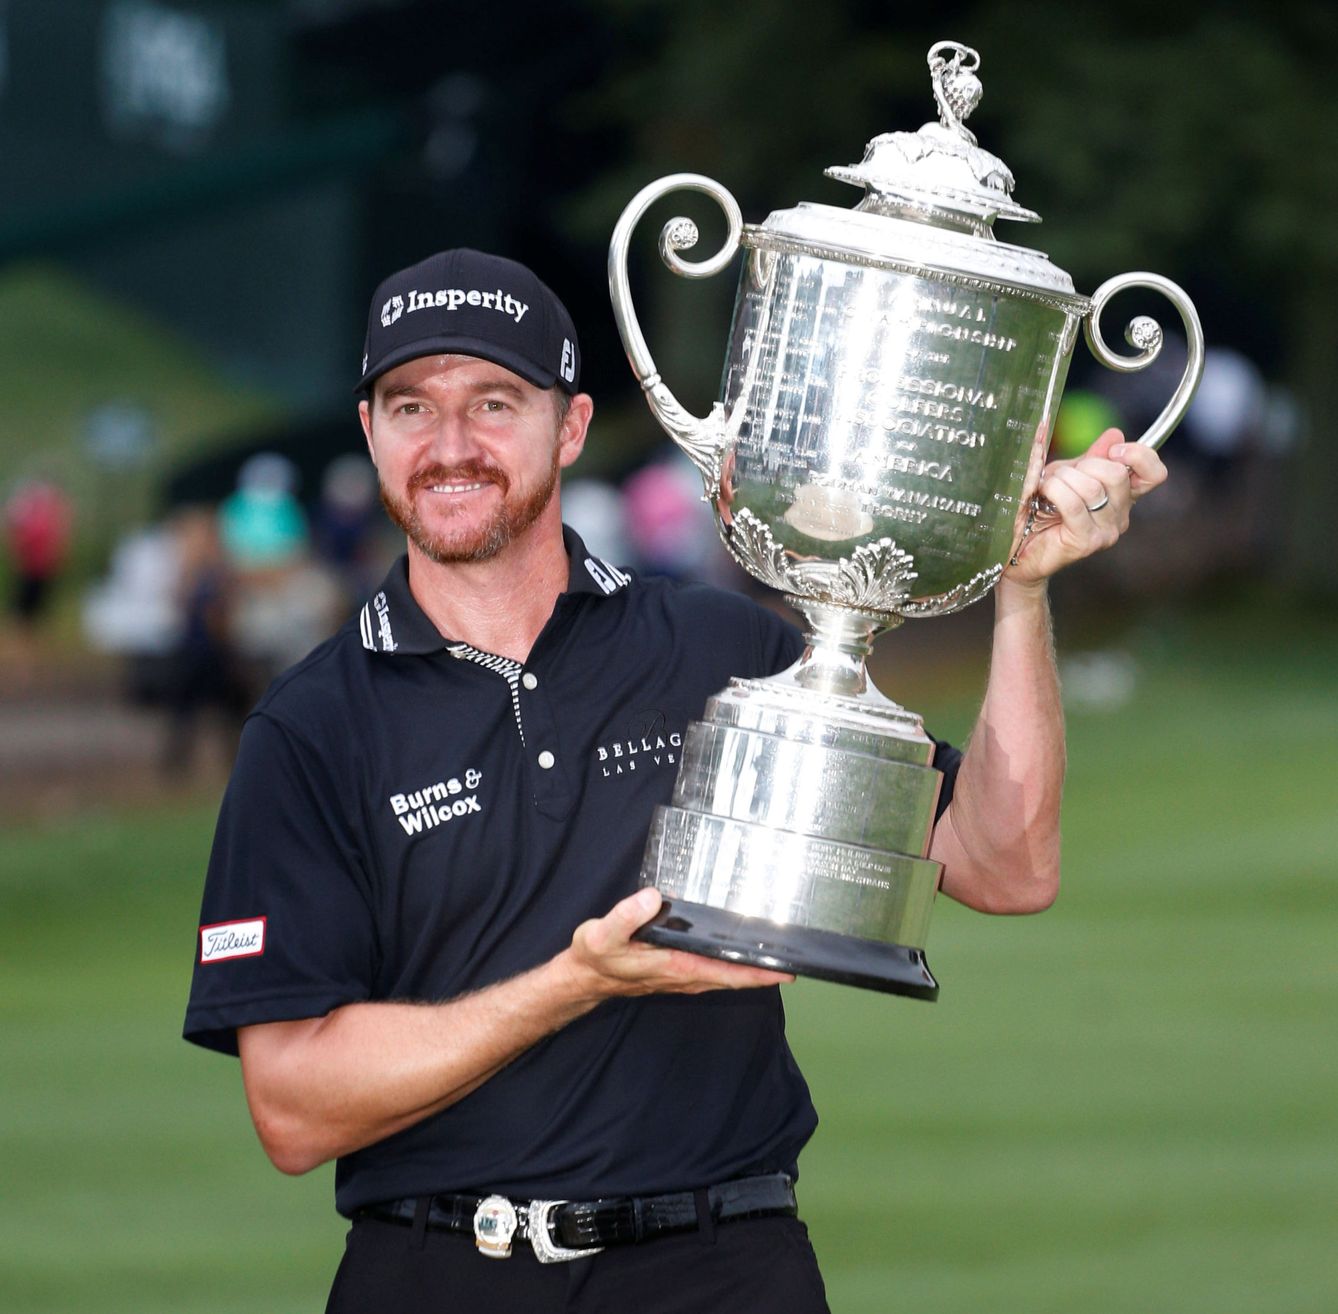 Jul 31, 2016; Springfield, NJ, USA; PGA golfer Jimmy Walker holds up the Wanamaker Trophy after winning the 2016 PGA Championship golf tournament at Baltusrol GC - Lower Course. Mandatory Credit: Brian Spurlock-USA TODAY Sports     TPX IMAGES OF THE DAY